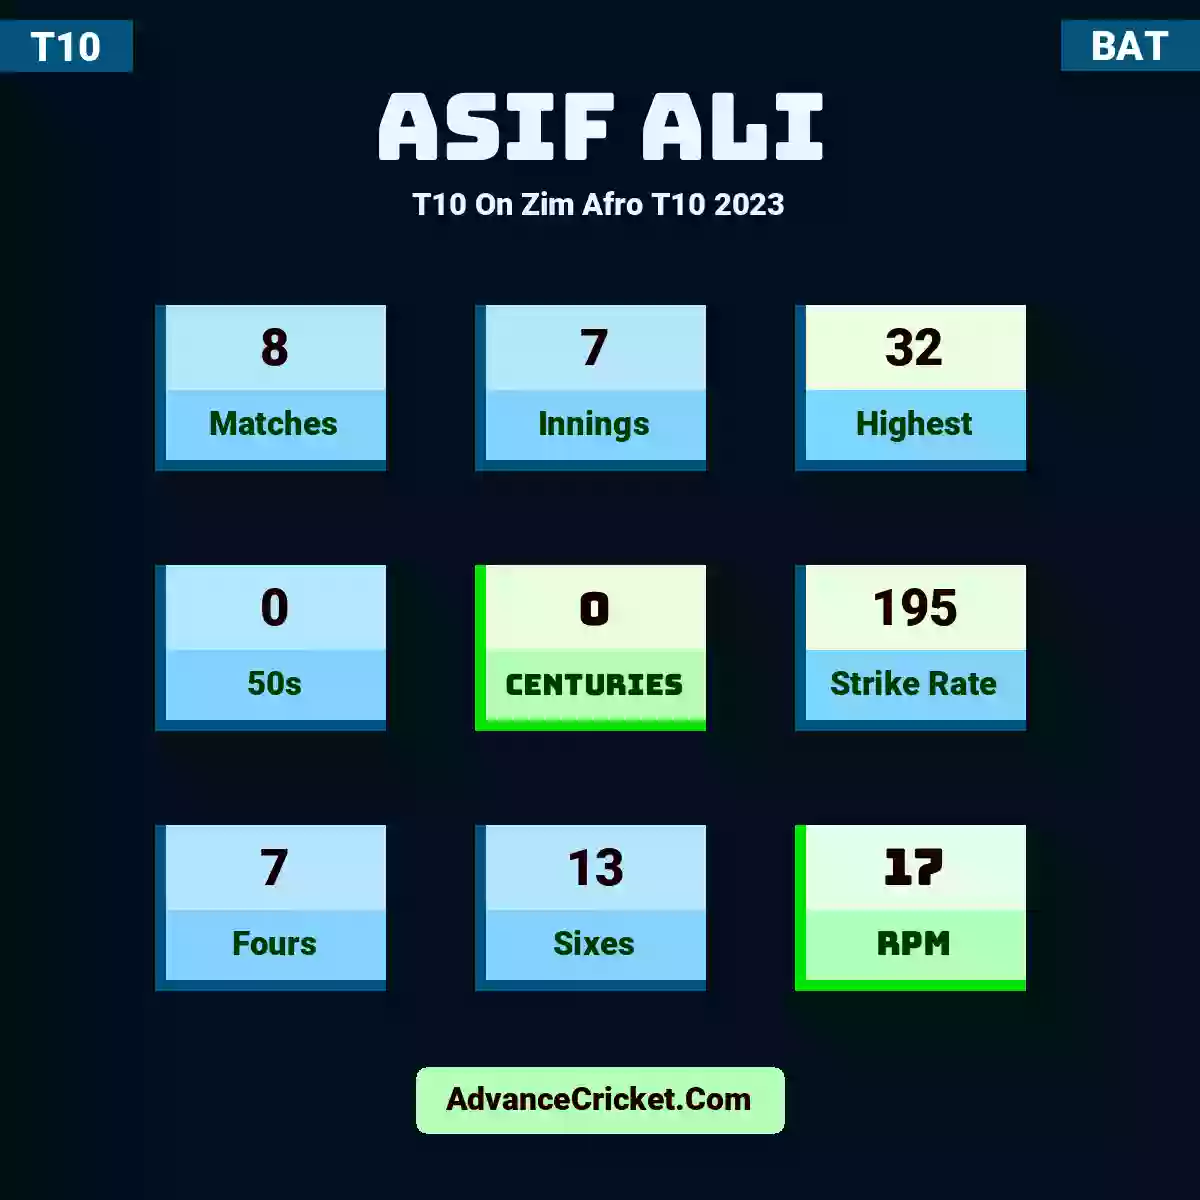 Asif Ali T10  On Zim Afro T10 2023, Asif Ali played 8 matches, scored 32 runs as highest, 0 half-centuries, and 0 centuries, with a strike rate of 195. A.Ali hit 7 fours and 13 sixes, with an RPM of 17.